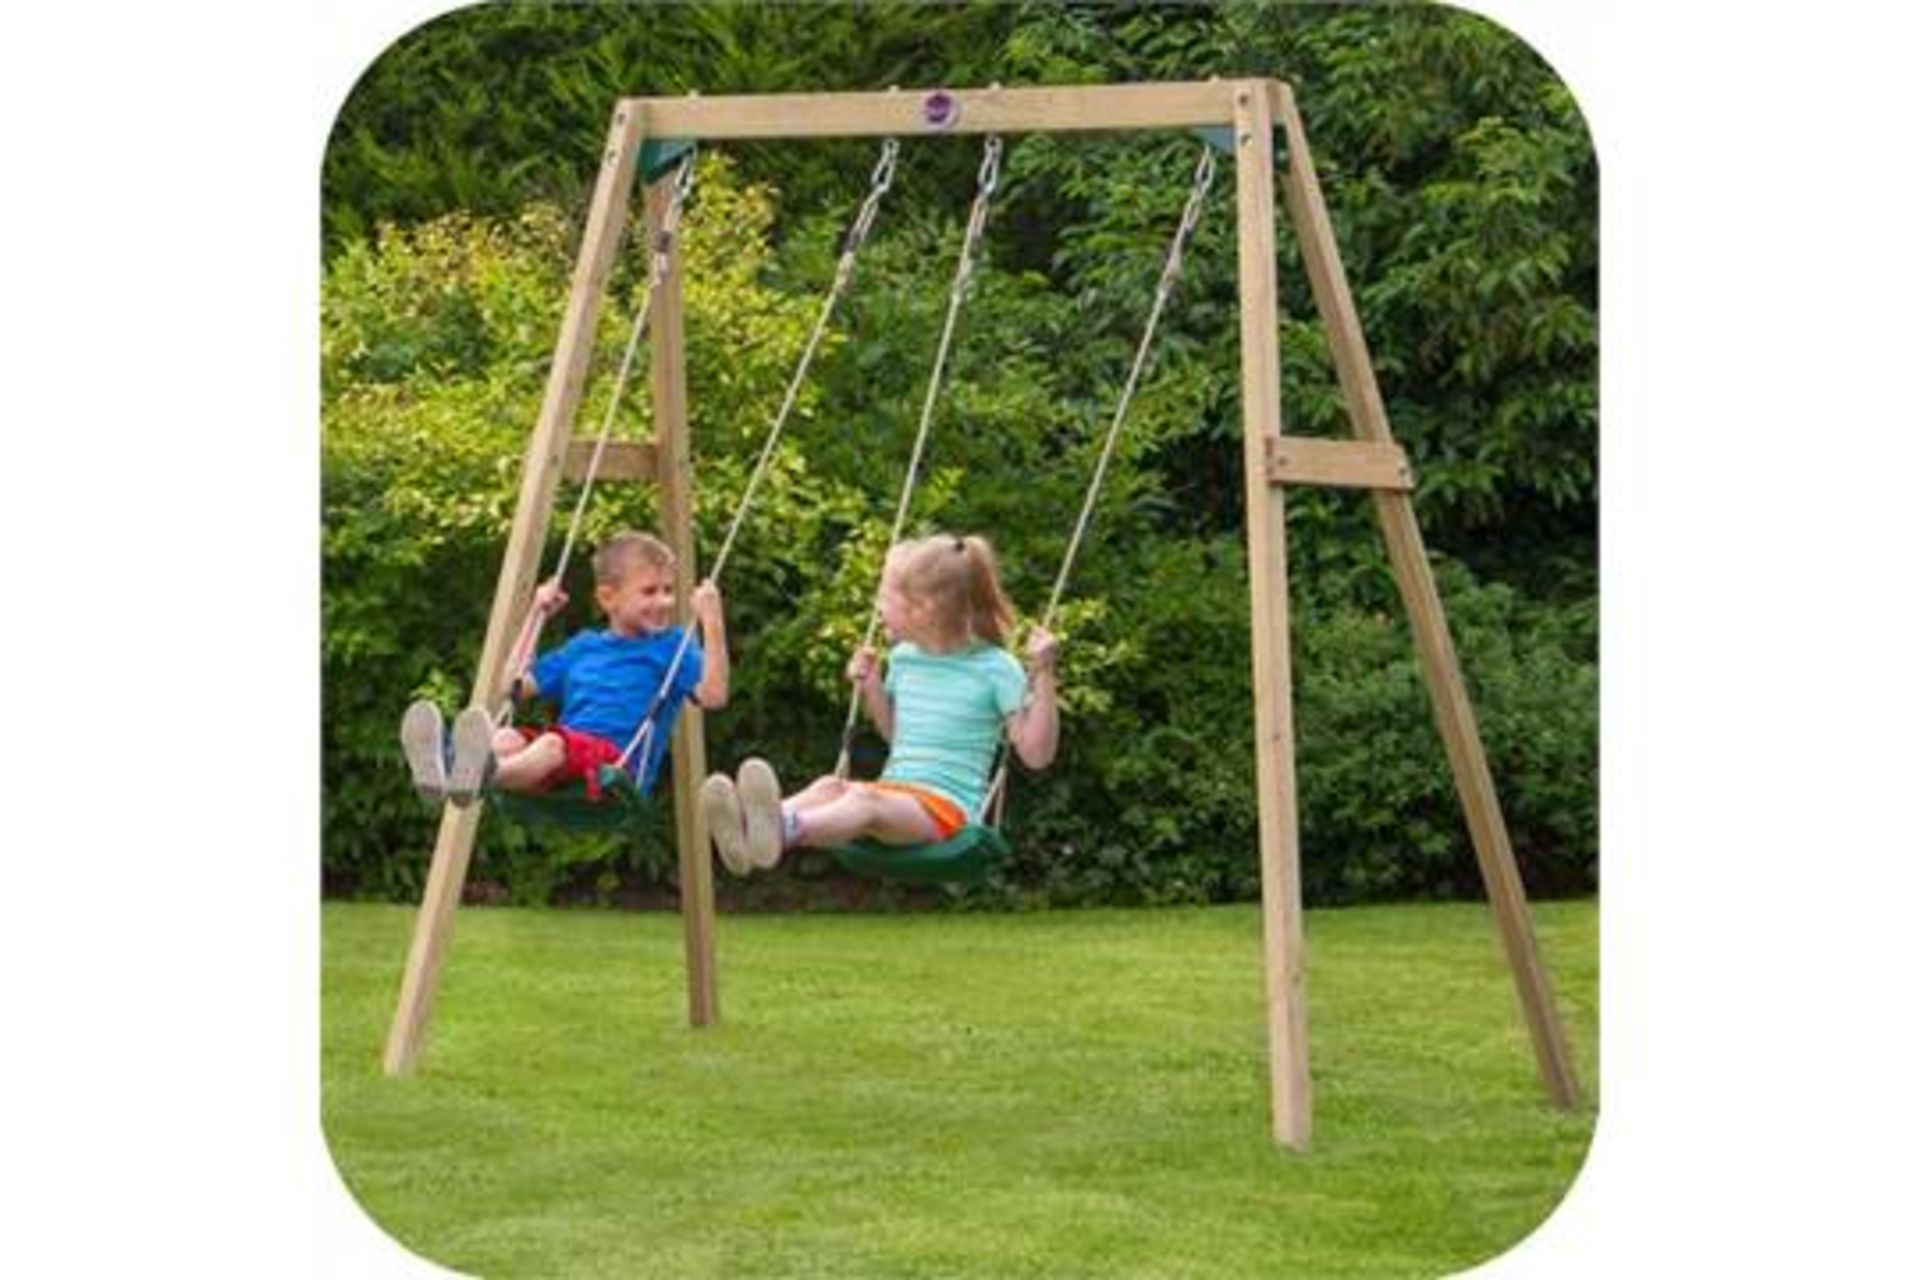 1 x Plum Wooden Double Swing Set. RRP £199.99. Double the seats for twice the fun! Children will